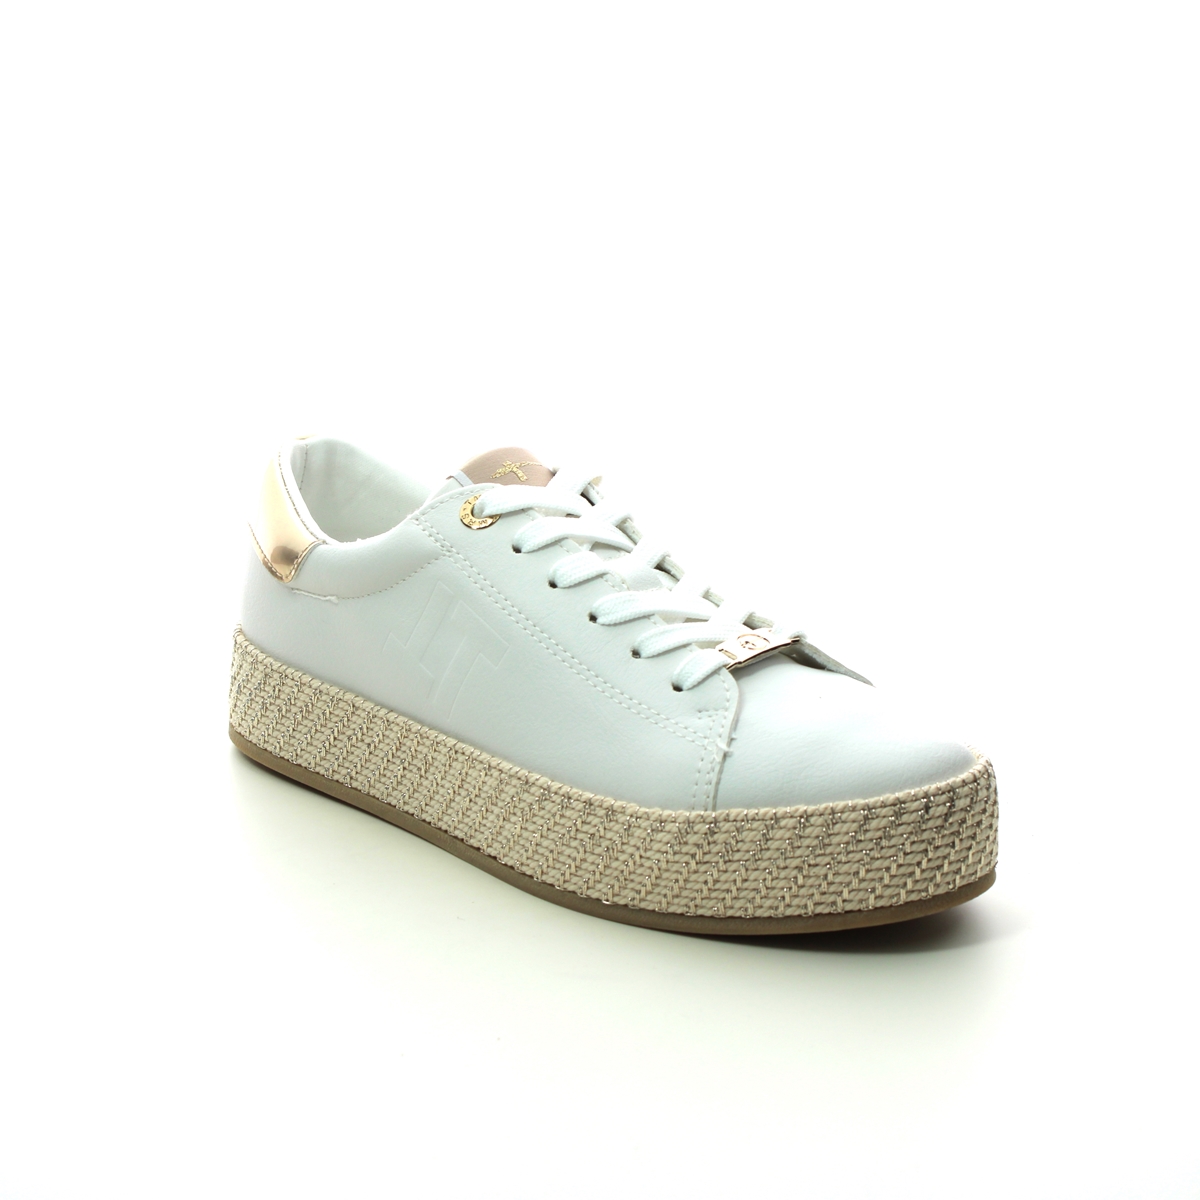 Tamaris Espadrille White Gold Womens Trainers 23713-20-190 In Size 39 In Plain White Gold